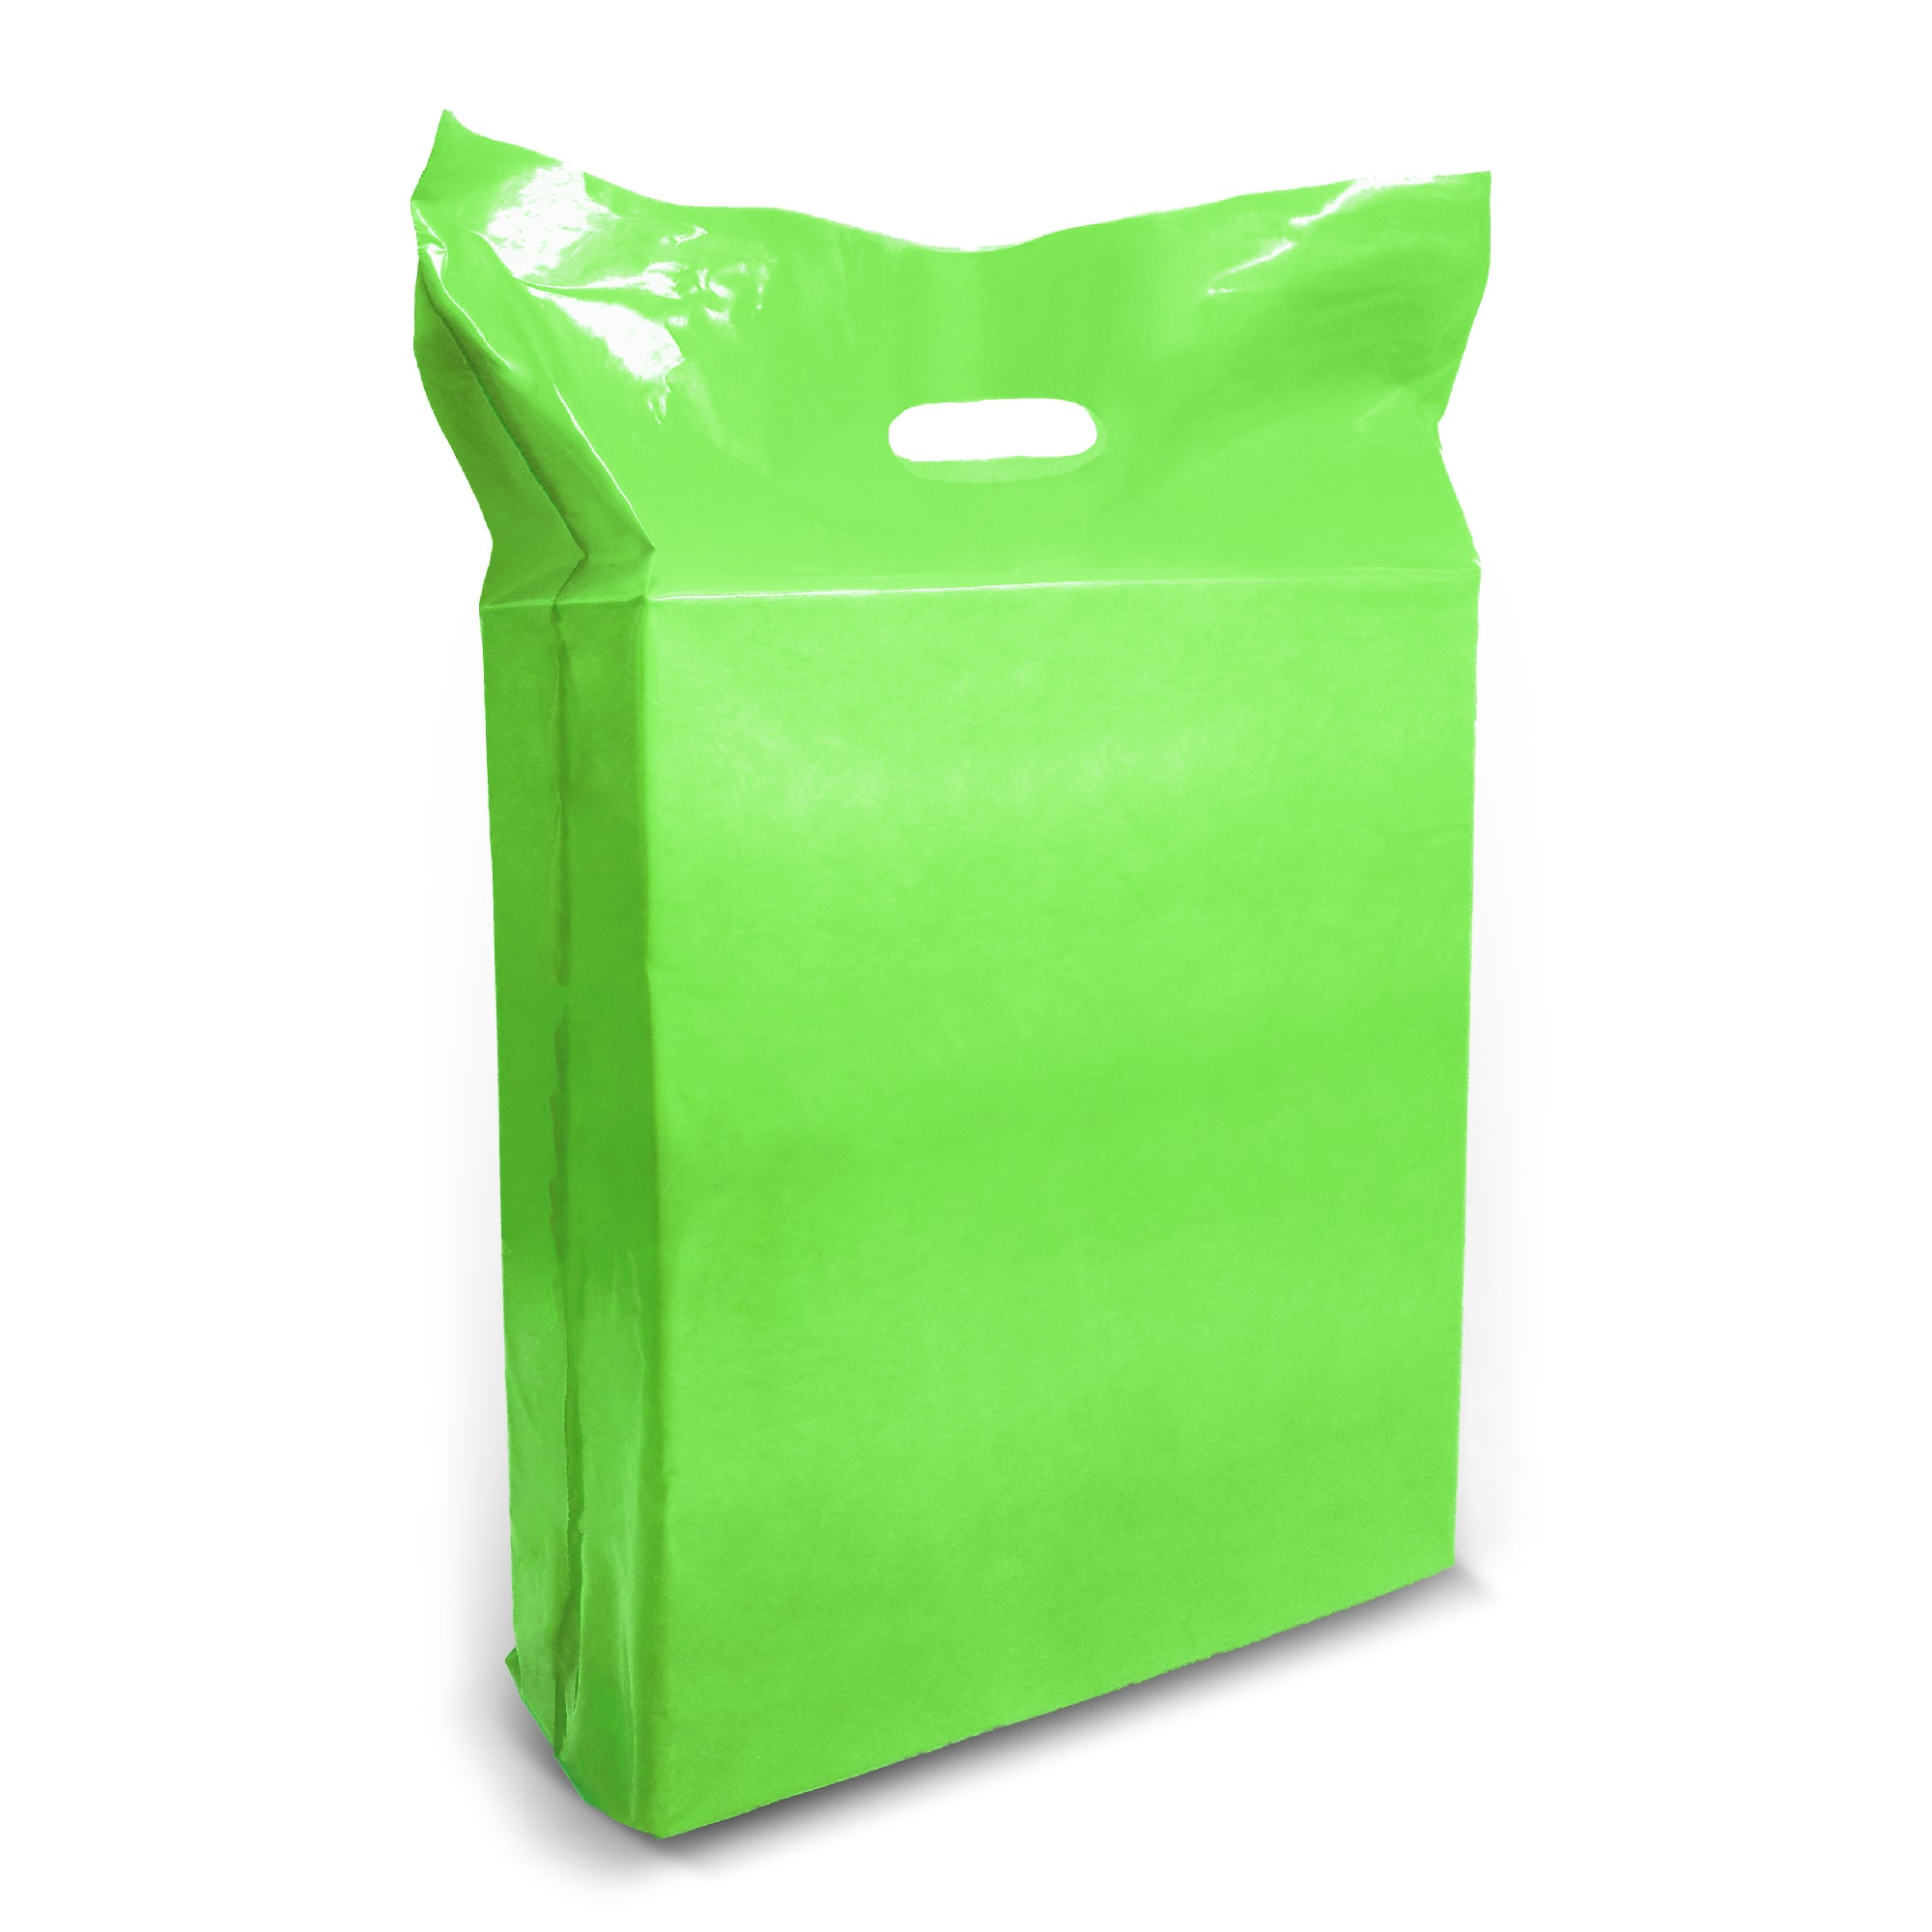 White Merchandise Plastic Shopping Bags - 100 Pack 12 x 15with 1.25 Mil Thick | Die